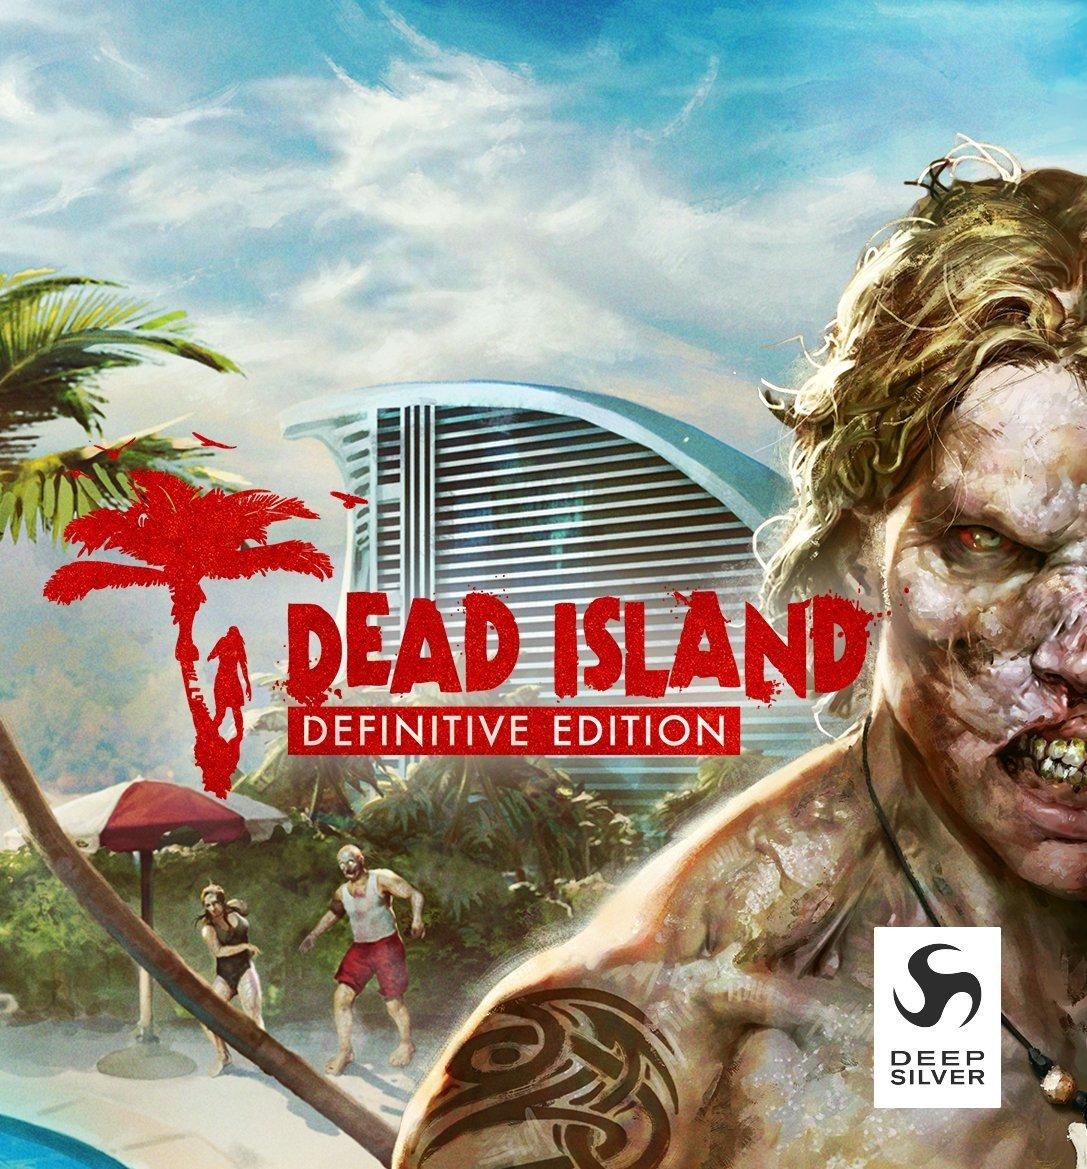 The zombie island game